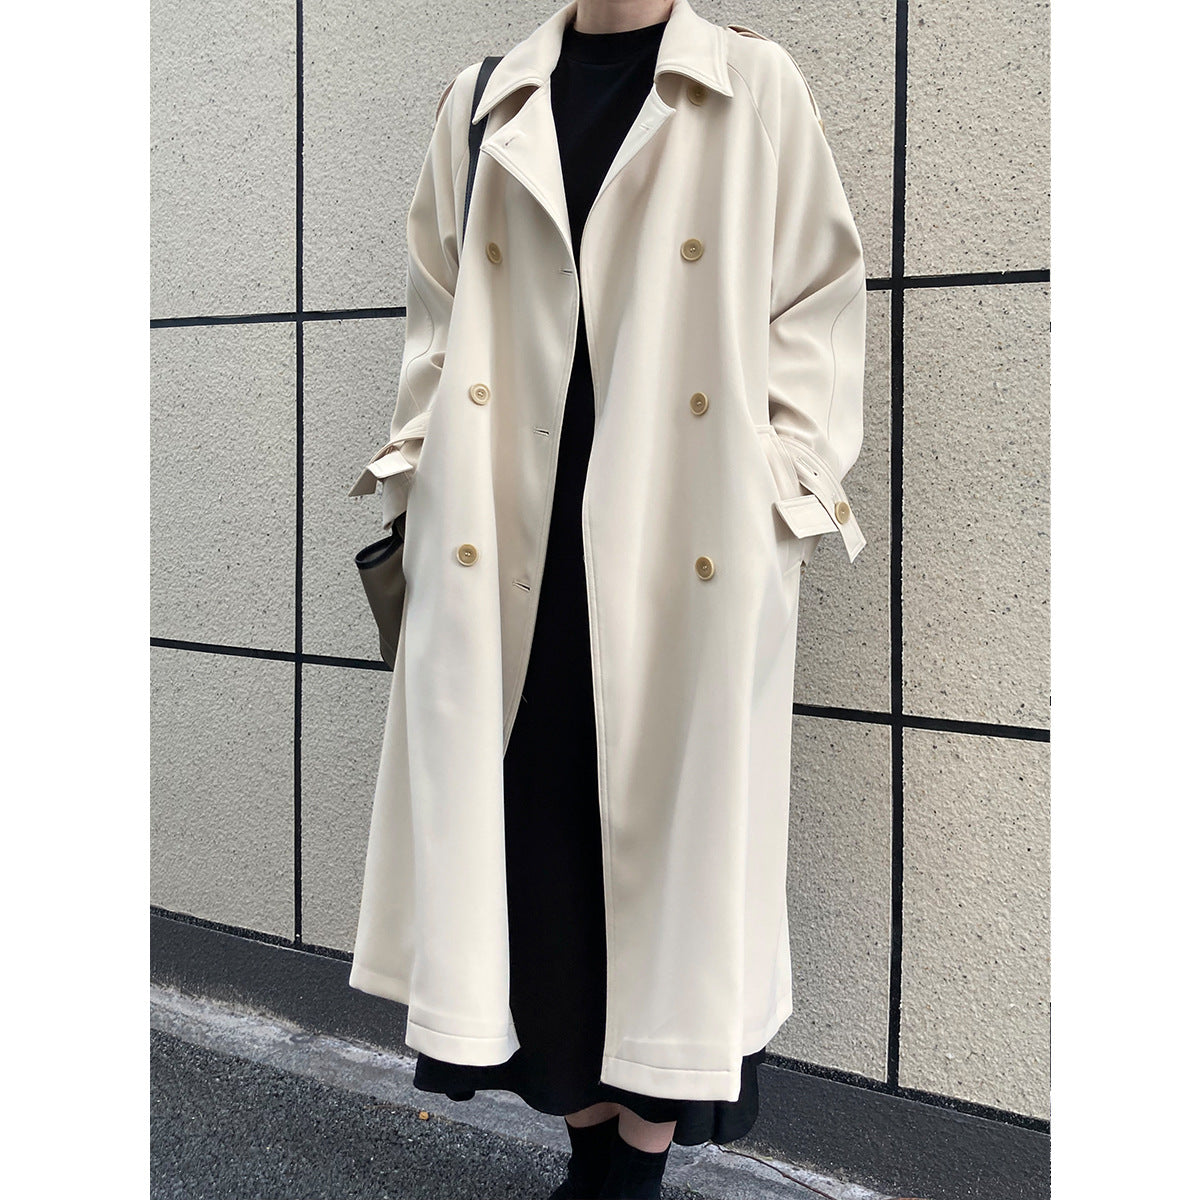 Fashion Fall Wind Break Long Overcoats for Women-Outerwear-Ivory-S-Free Shipping Leatheretro